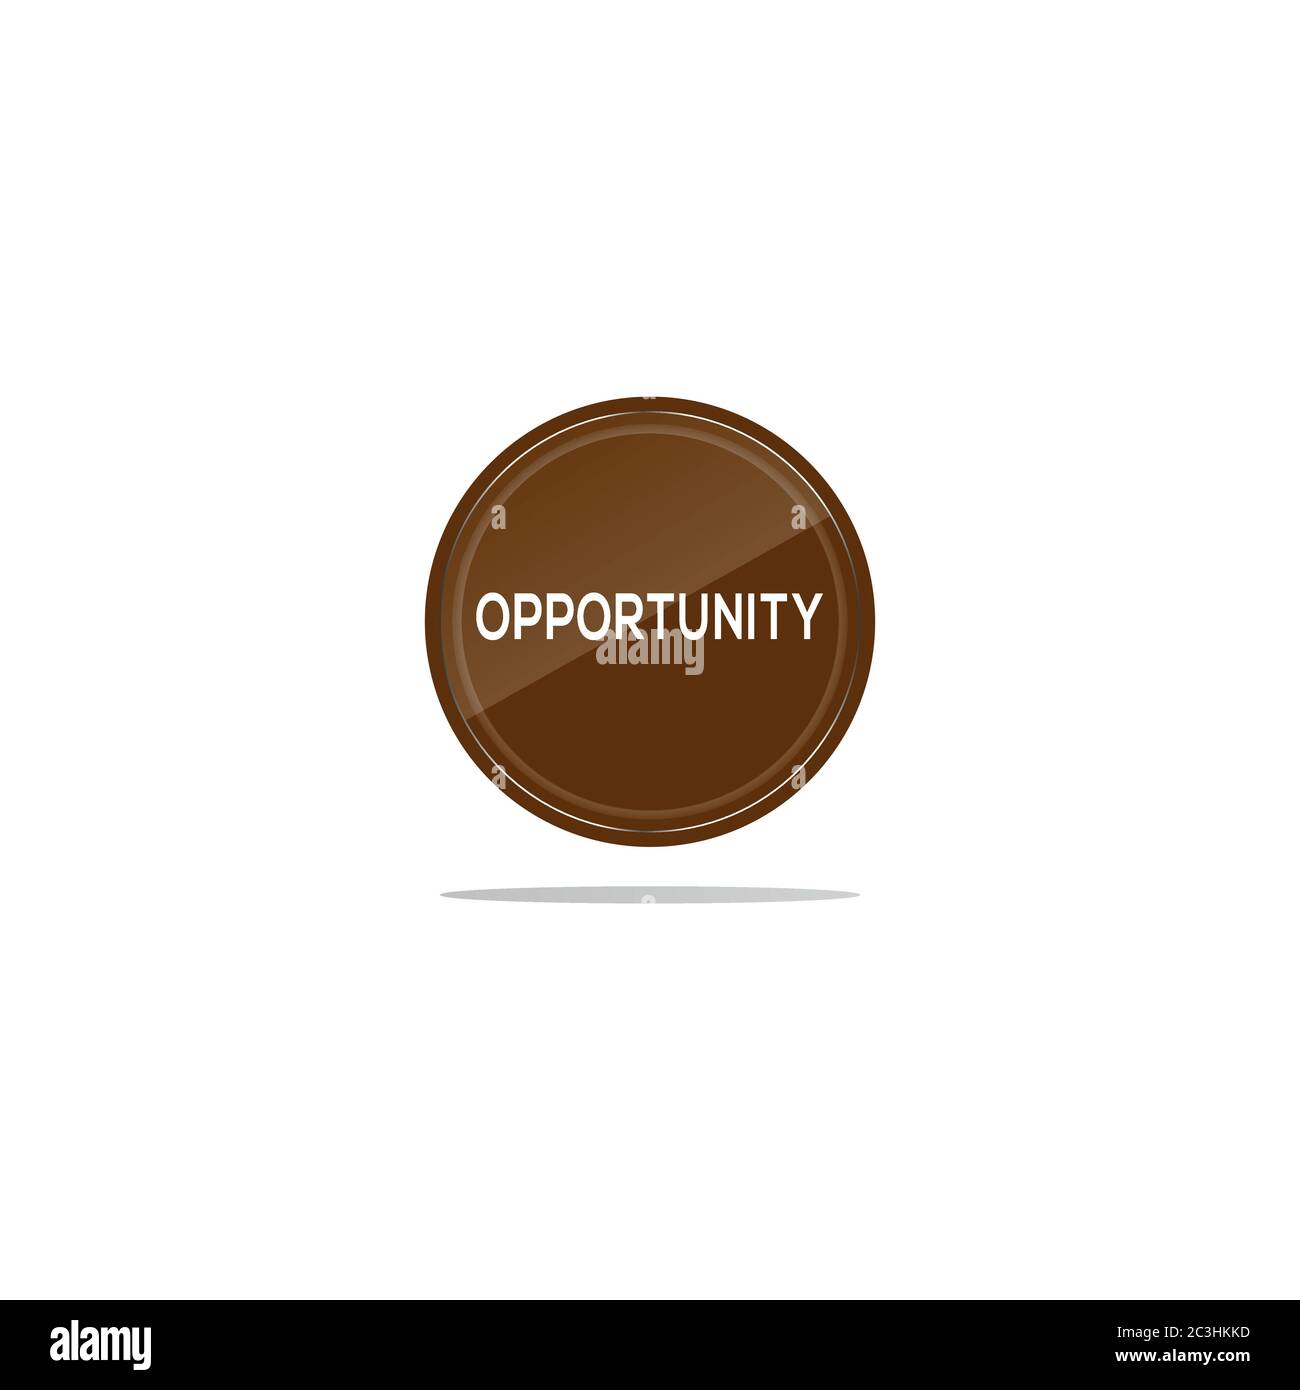 Writing opportunity in a brown circle. There is a circular glass in front of the opportunity article. Stock Vector